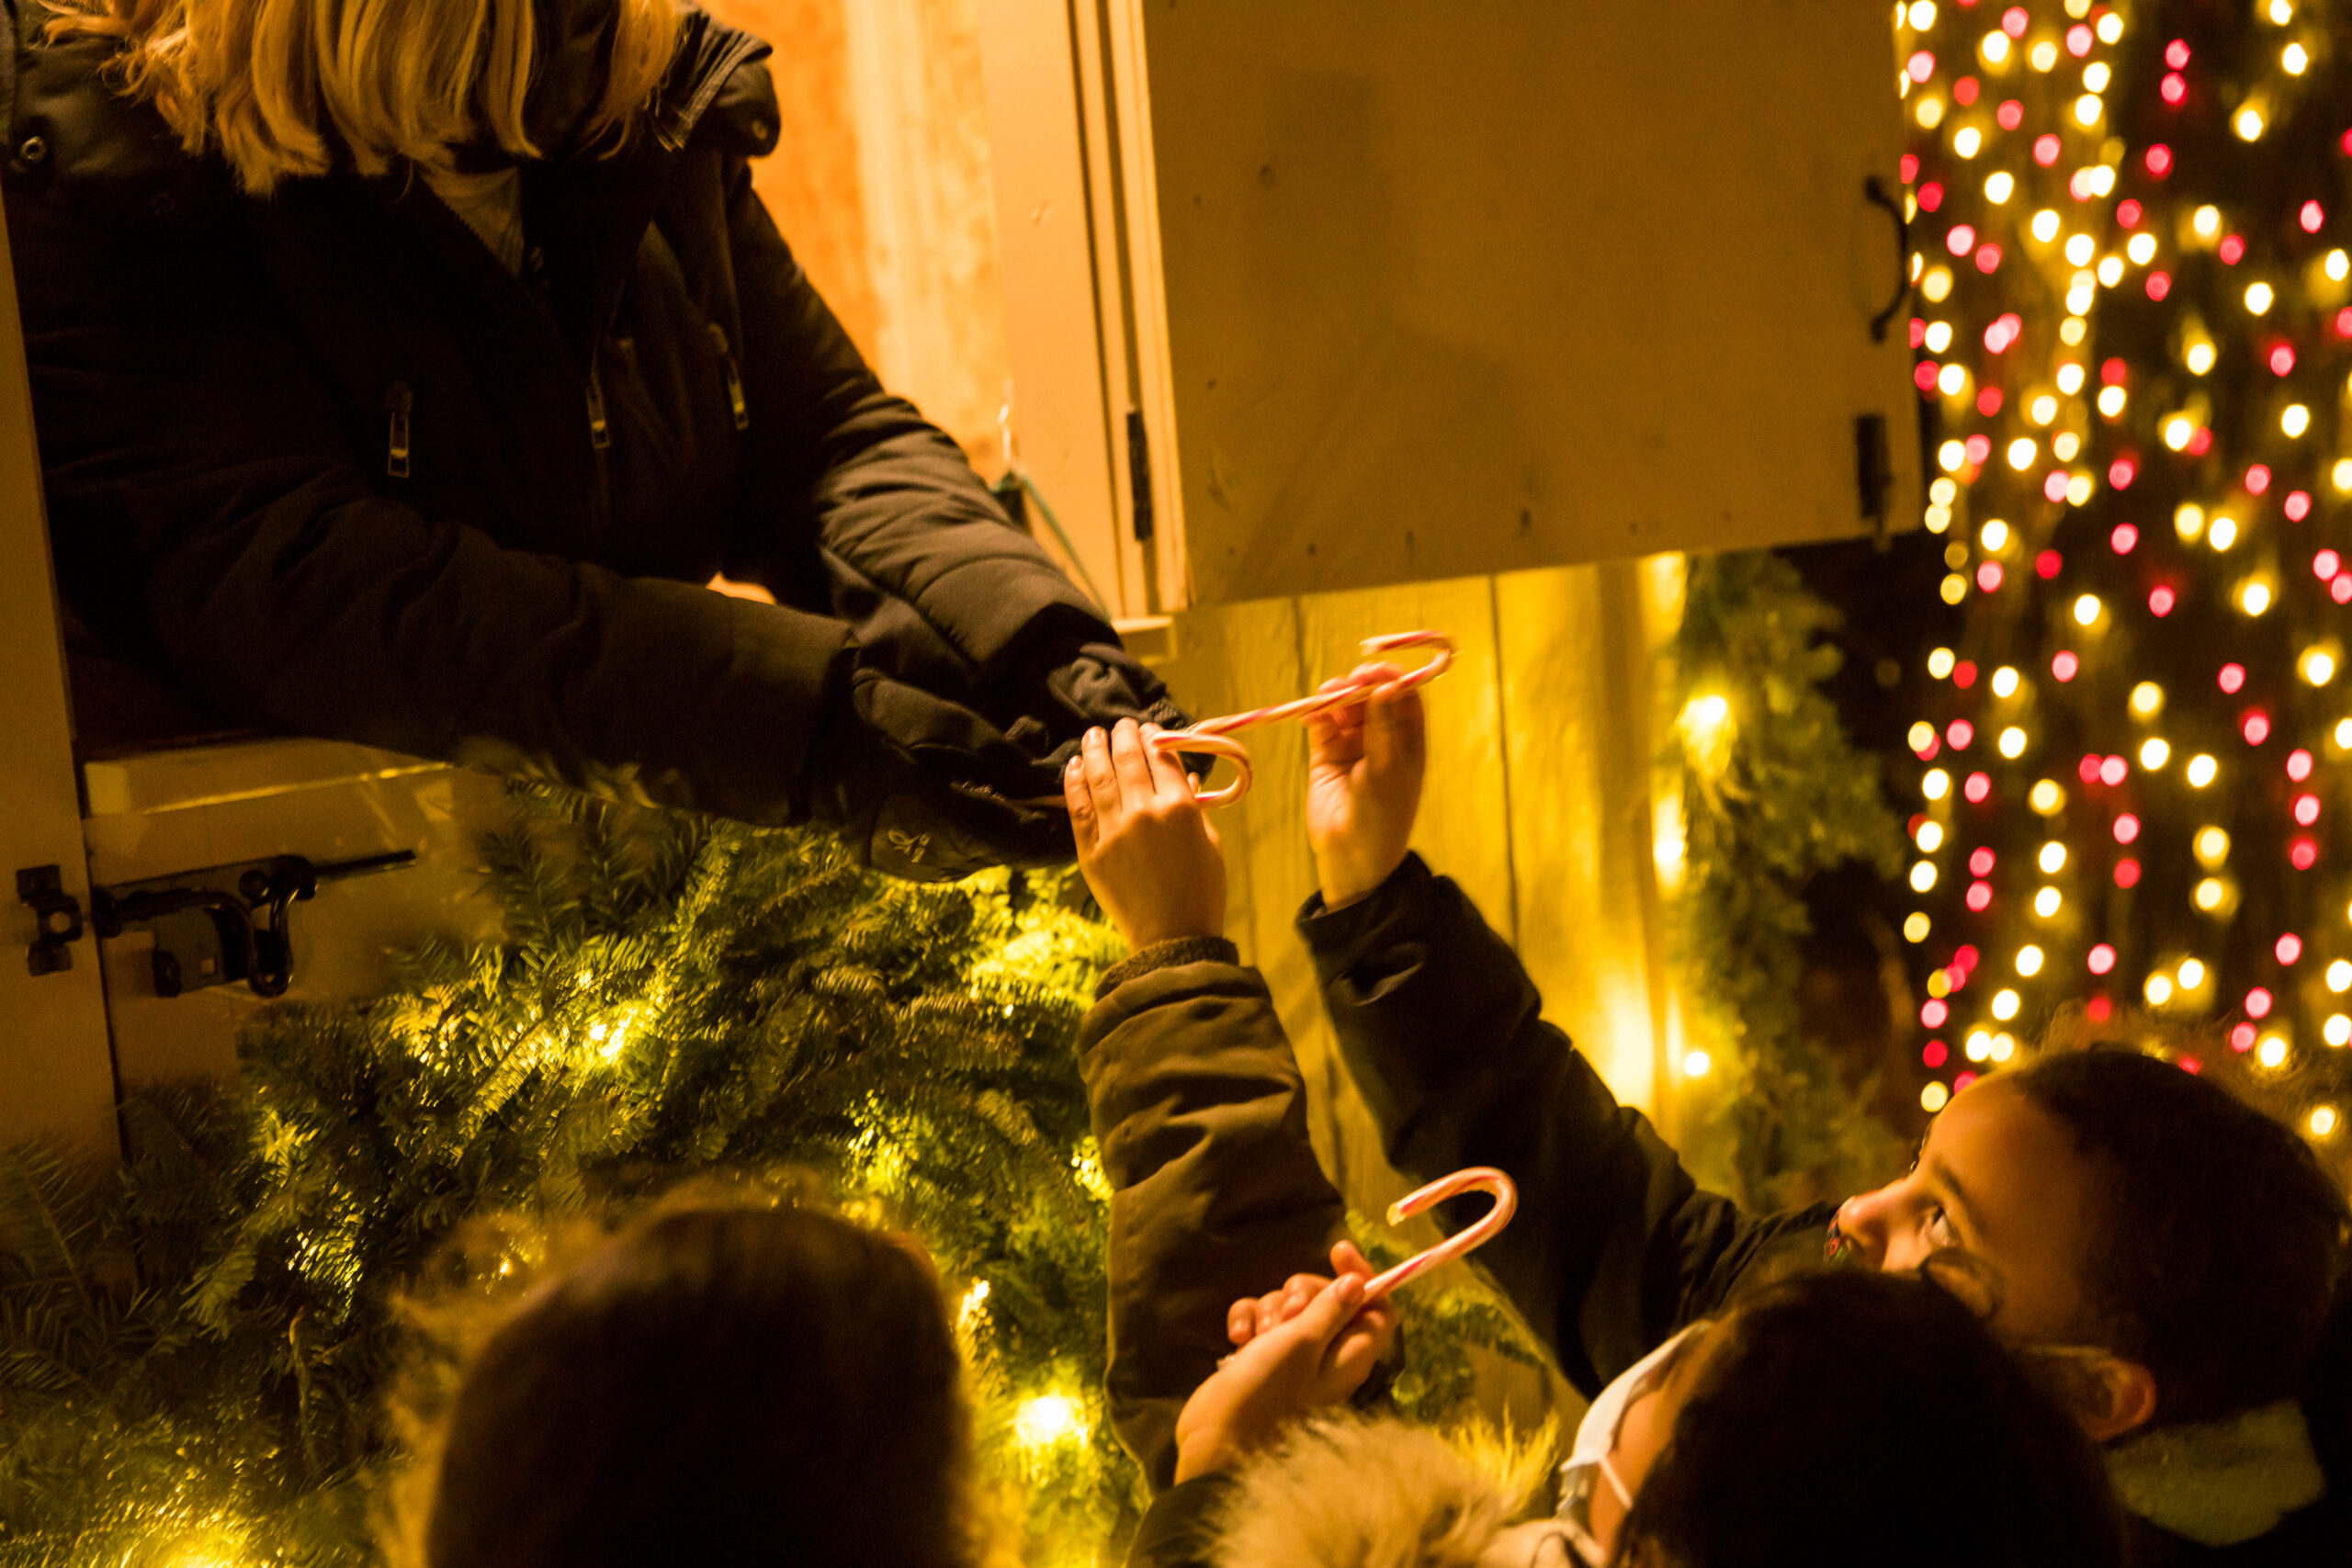 Four children standing outdoors beneath a window receiving candy canes from someone inside, surrounded by holiday lights at Winterlights